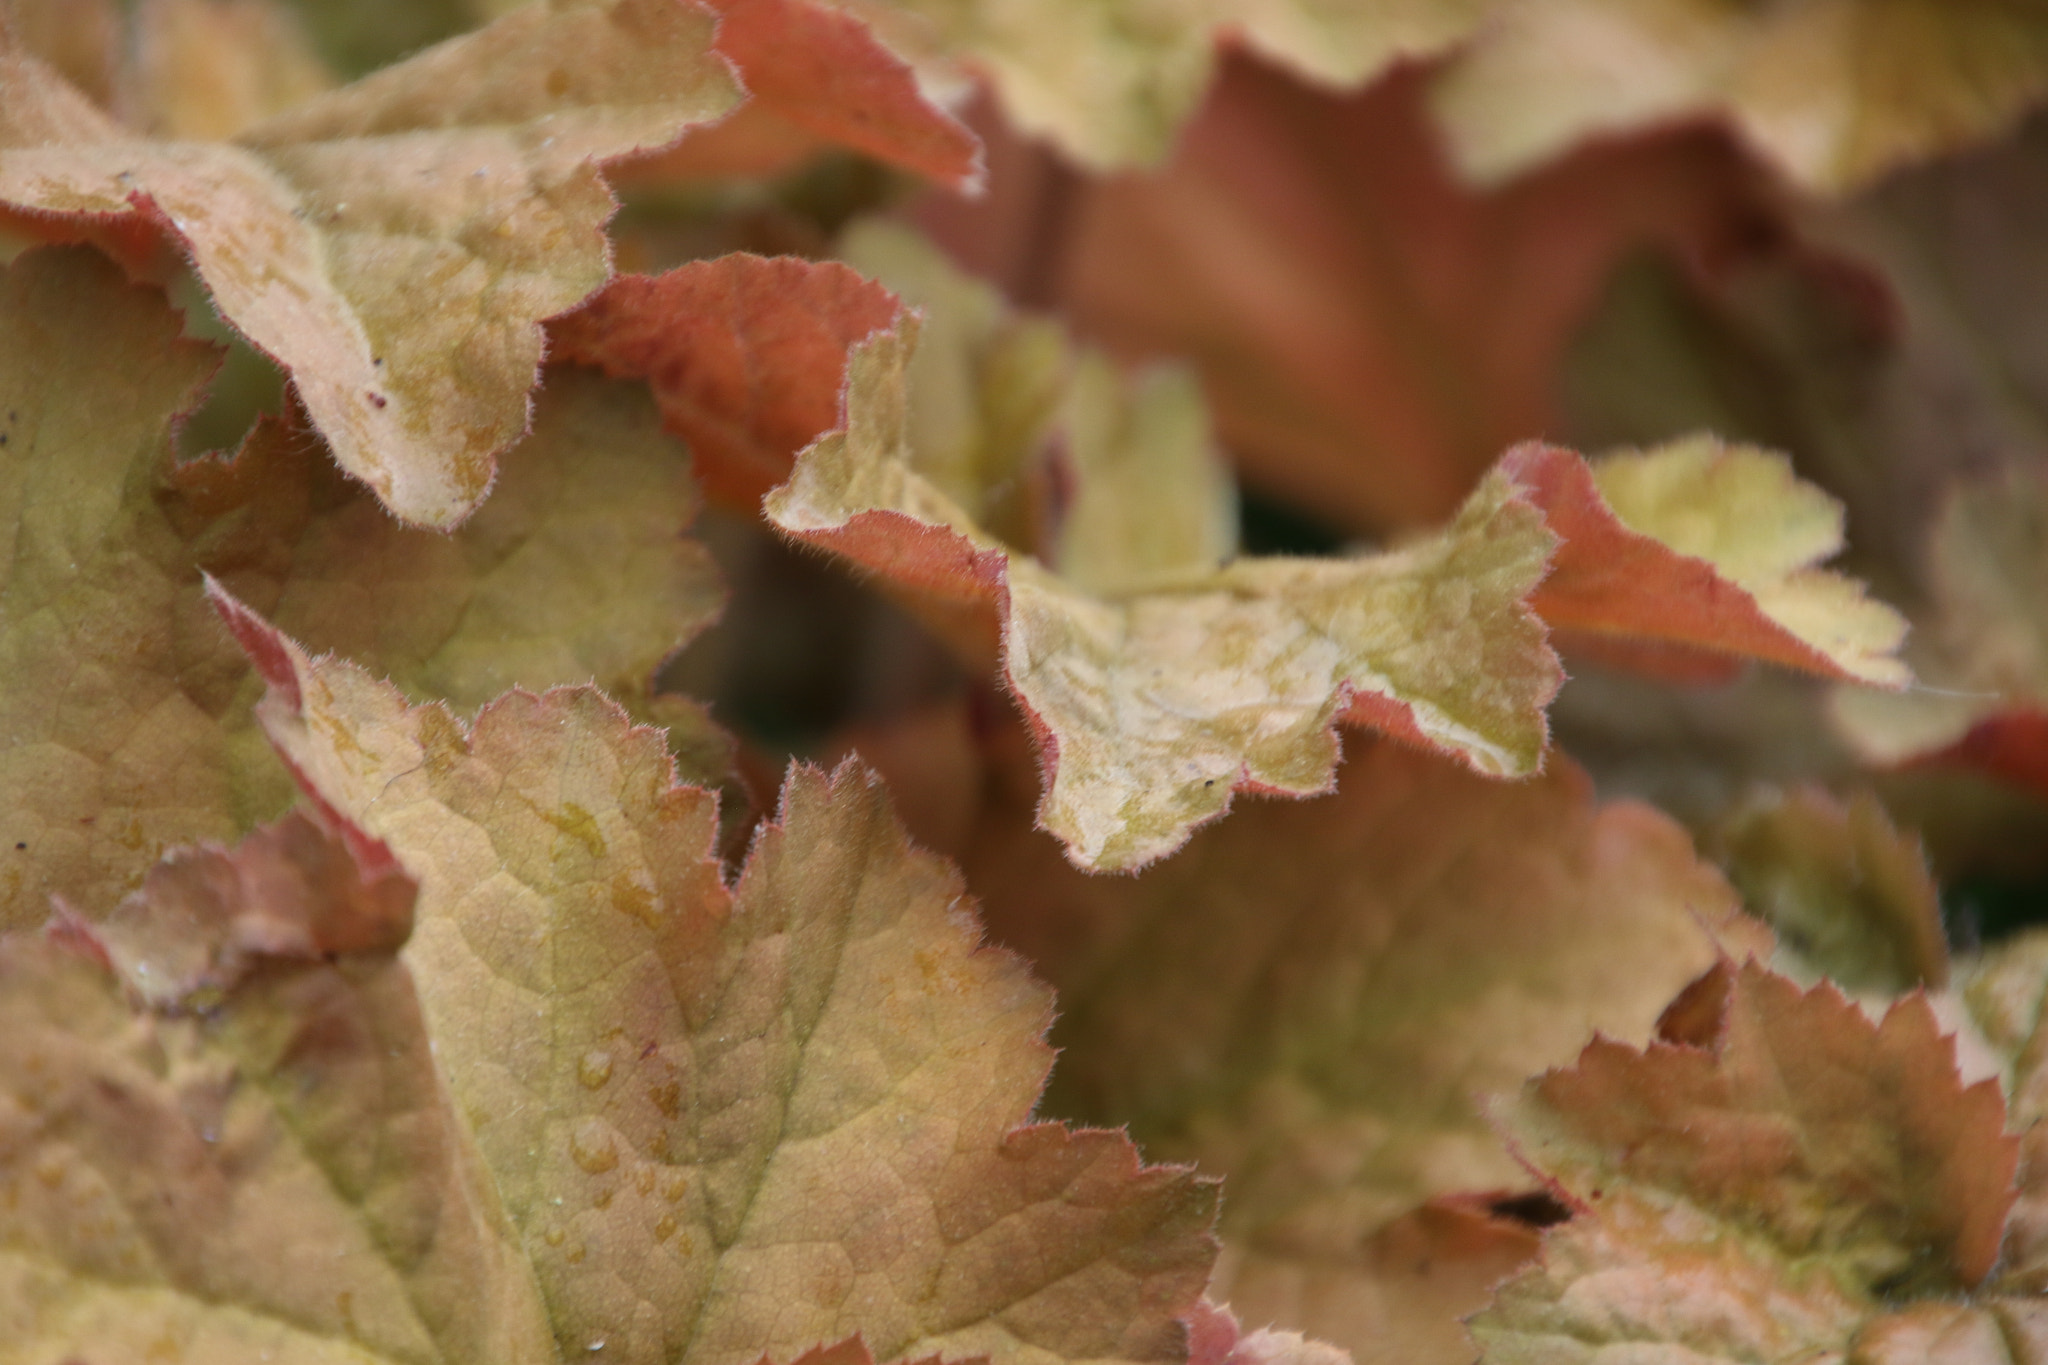 Tamron 16-300mm F3.5-6.3 Di II VC PZD Macro sample photo. Leaves at the bishop's garden photography